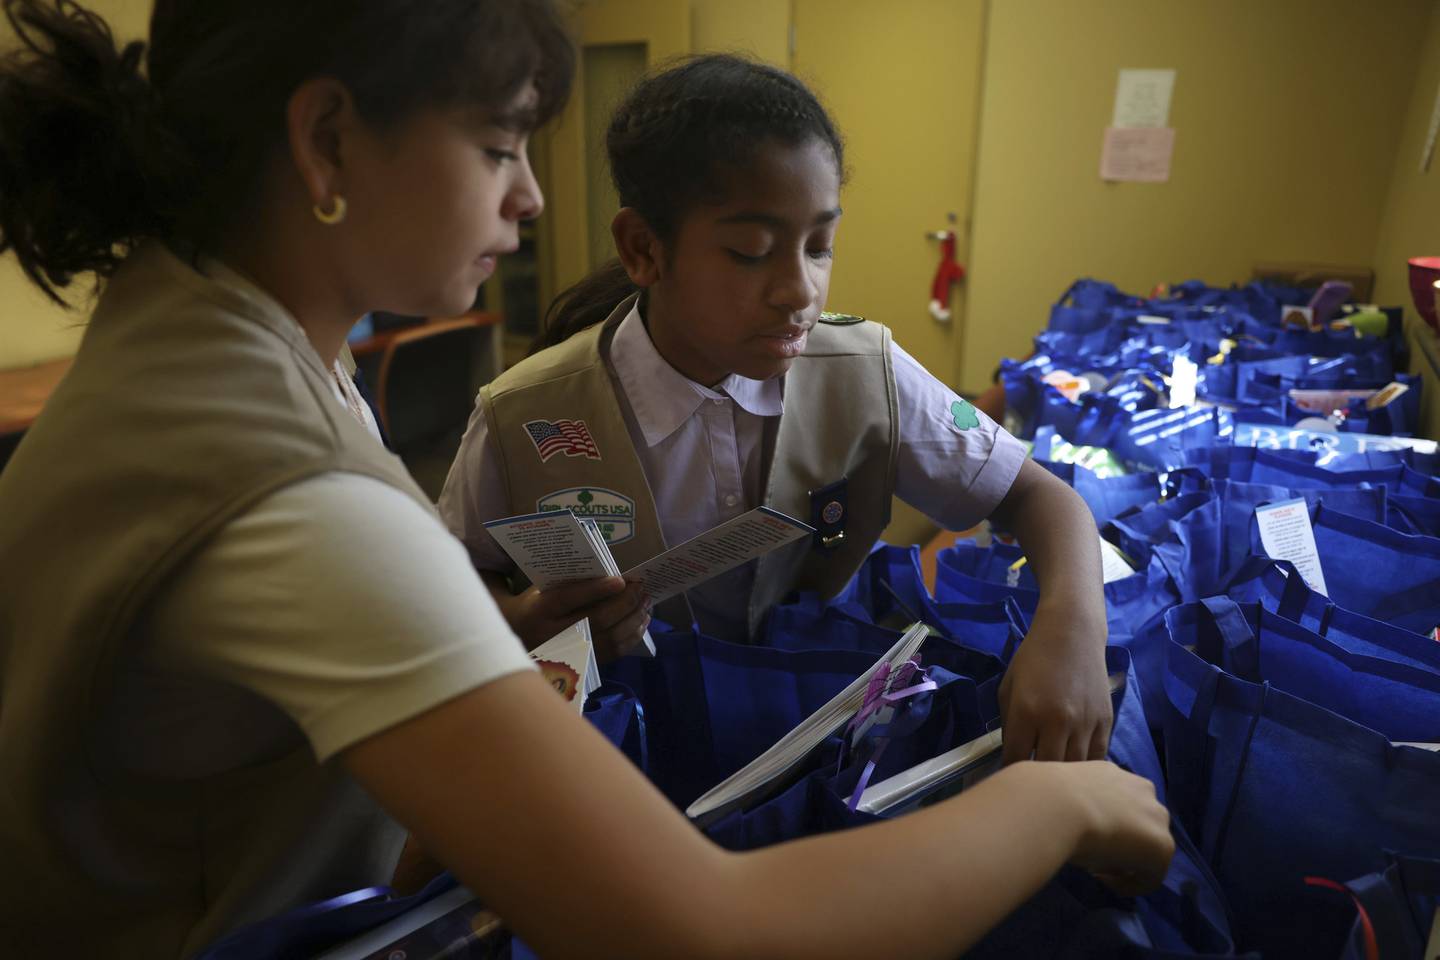 Girl Scouts Irene Vasquez, 12, left, and Jocelyn Vanzant, 12, put pamphlets in blue bags during a gift giveaway at the Pilsen Satellite Senior Center at Casa Maravilla on Dec. 18, 2022.